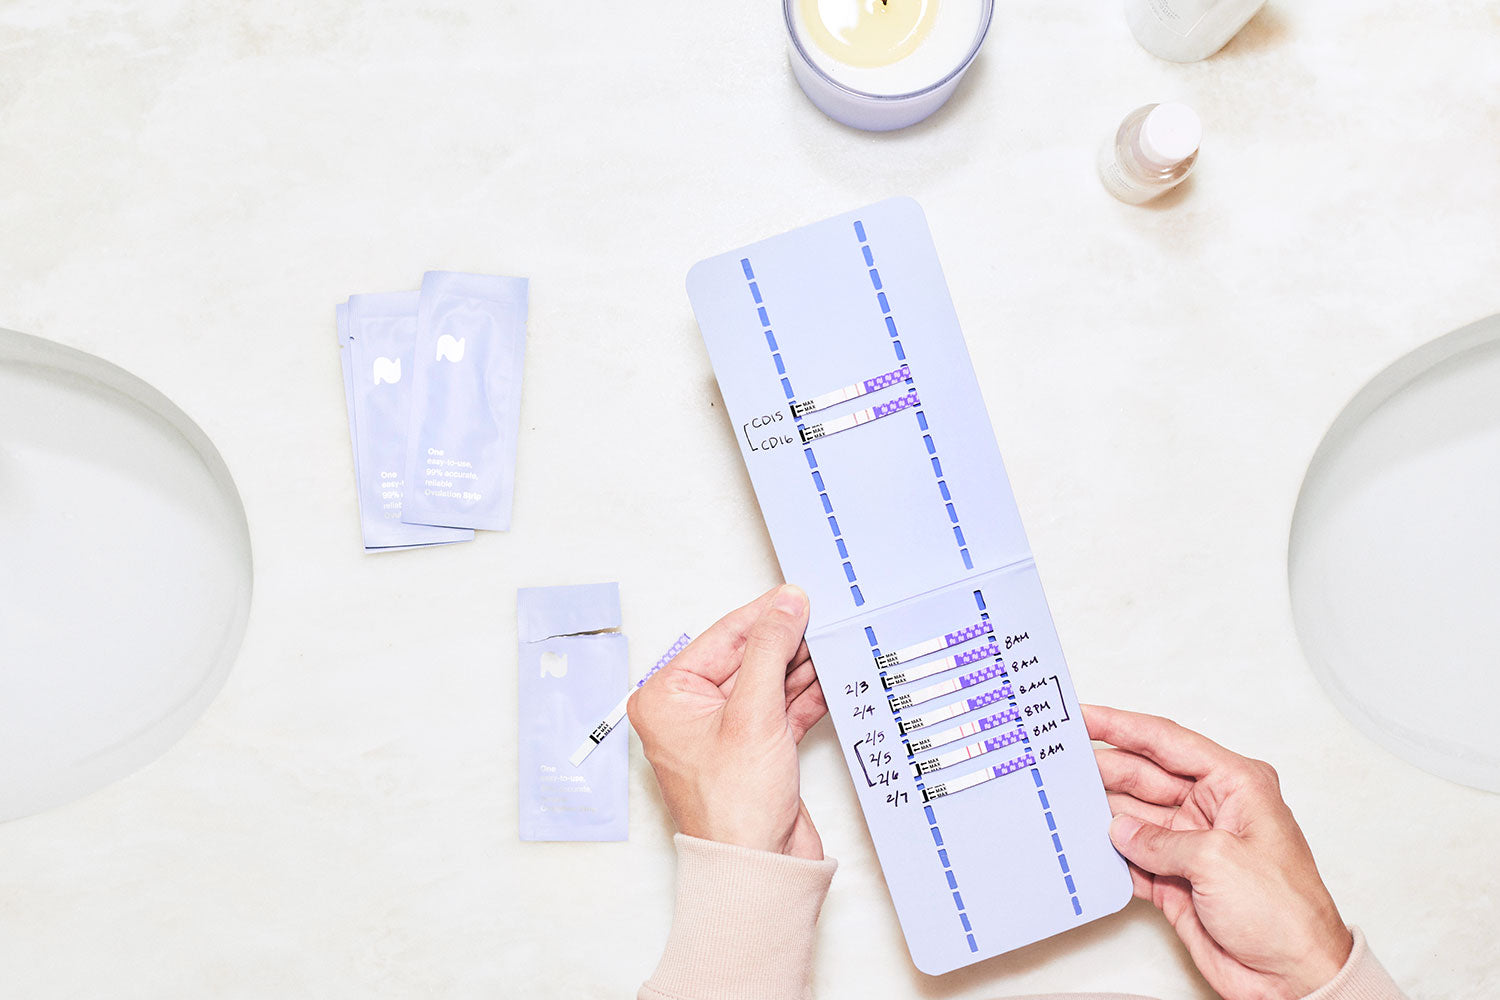 Ovulation Kits: Ovulation Strips, Cup & Tracker